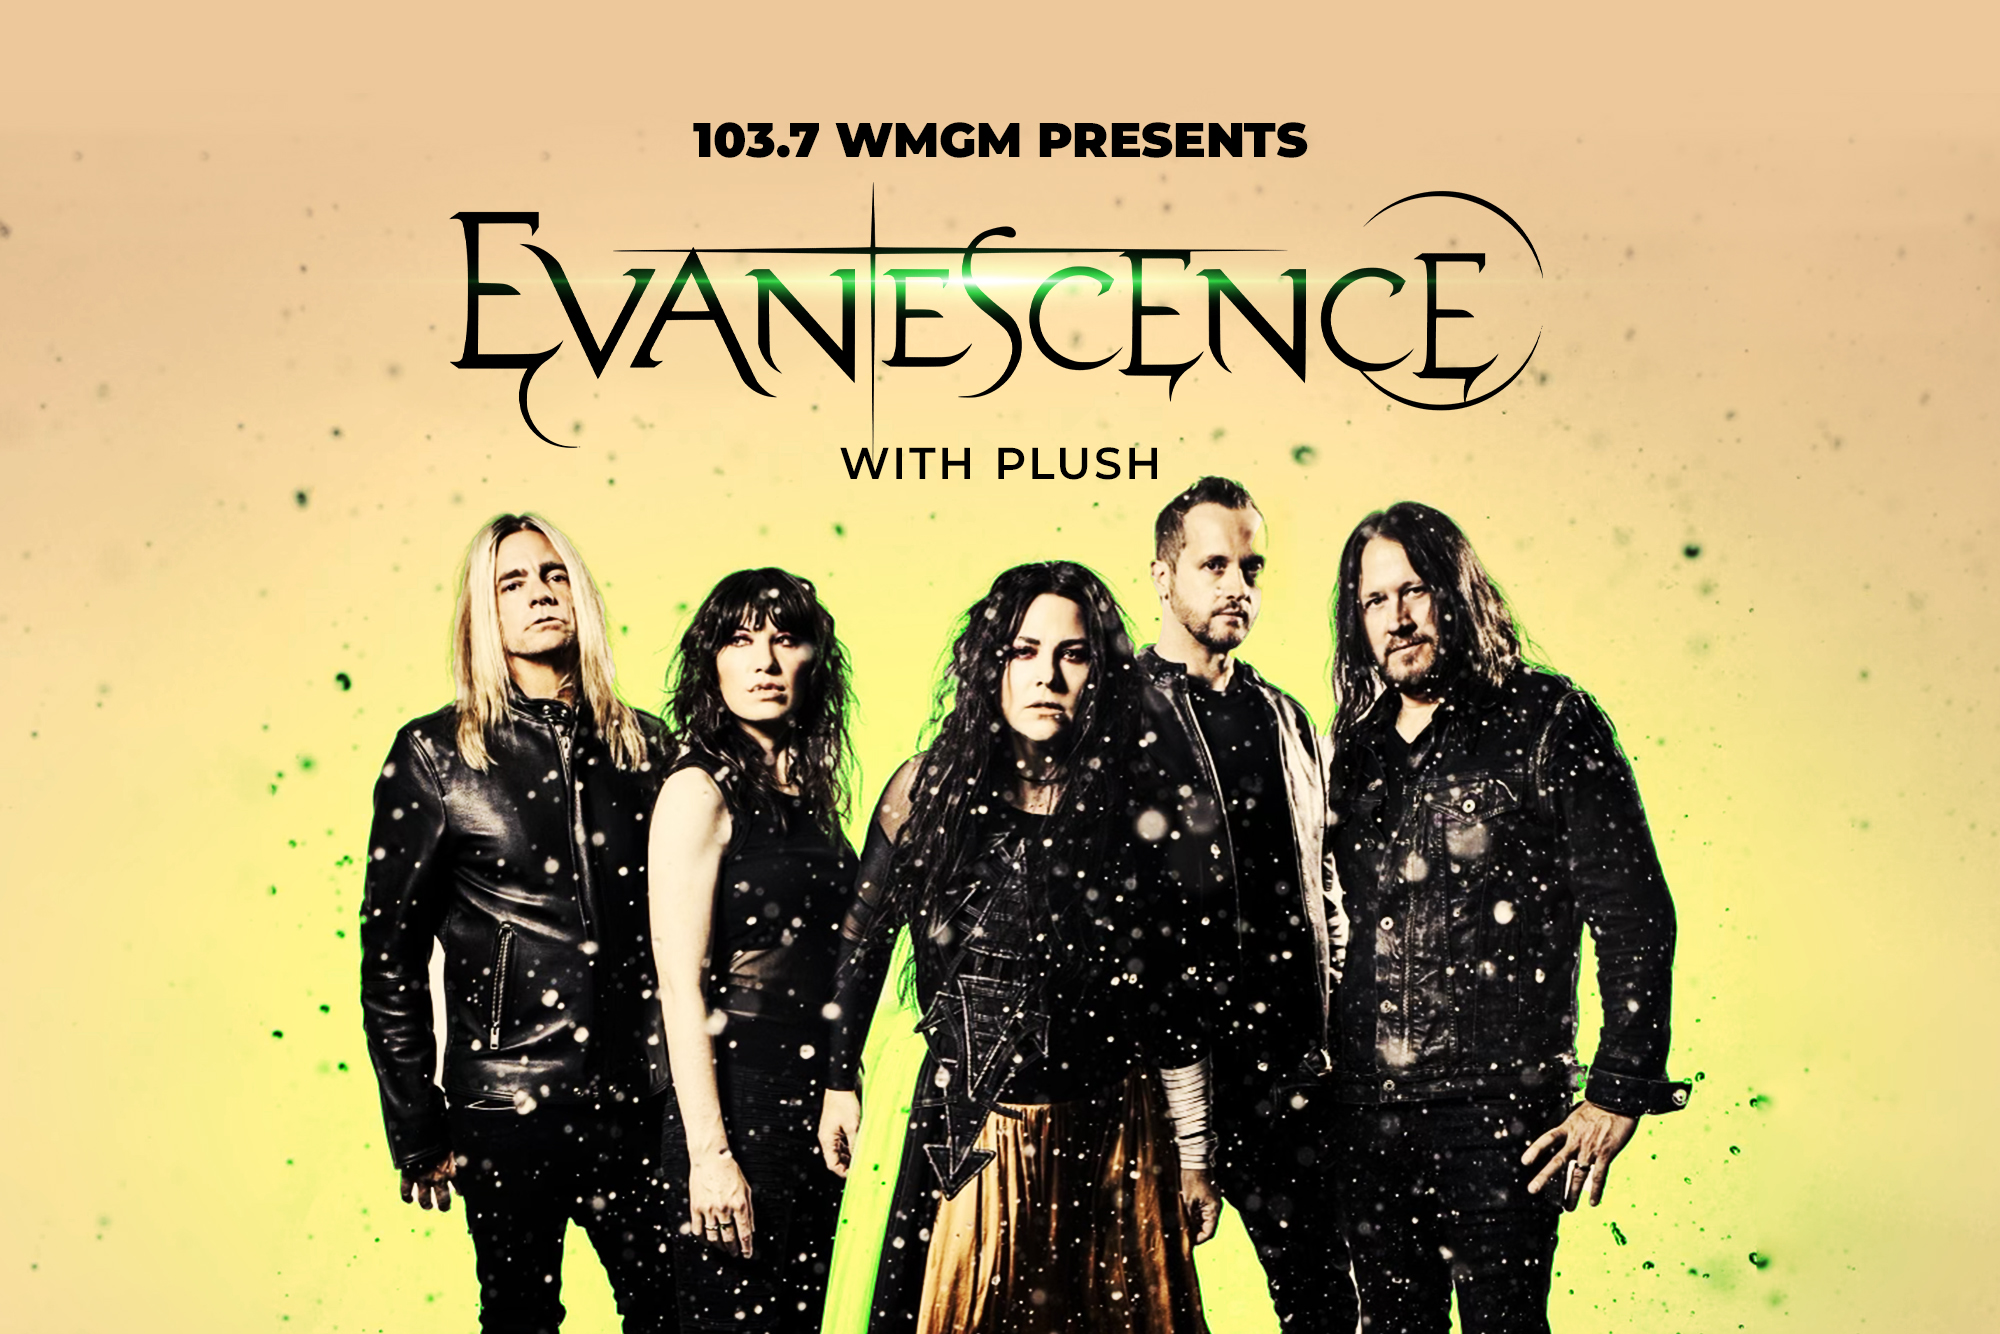 EVANESCENCE WITH PLUSH